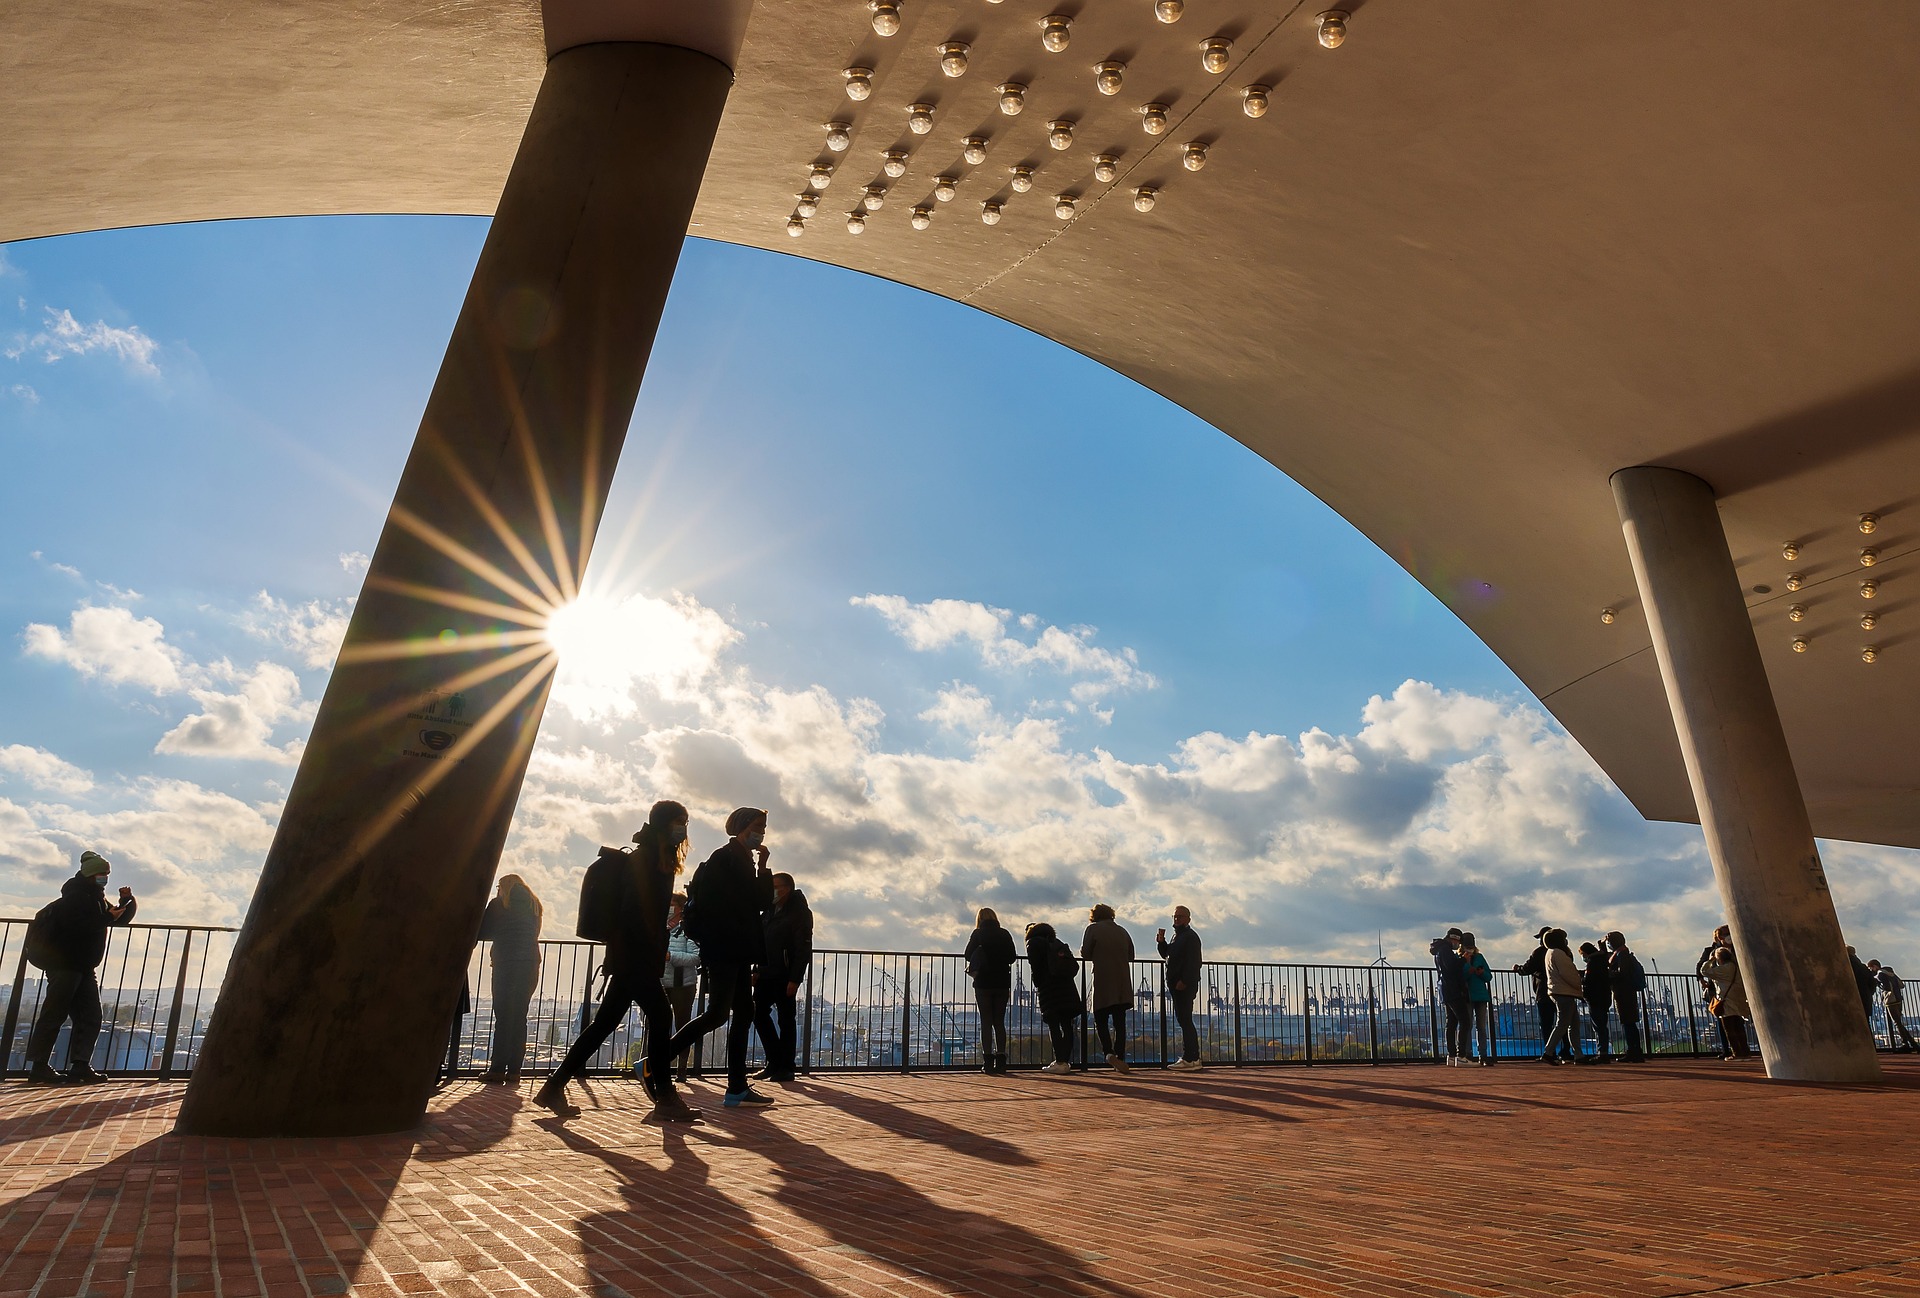 The view from the Plaza, the connecting link of the Elbphilharmonie concert hall between the base and the glass body, is freely accessible.